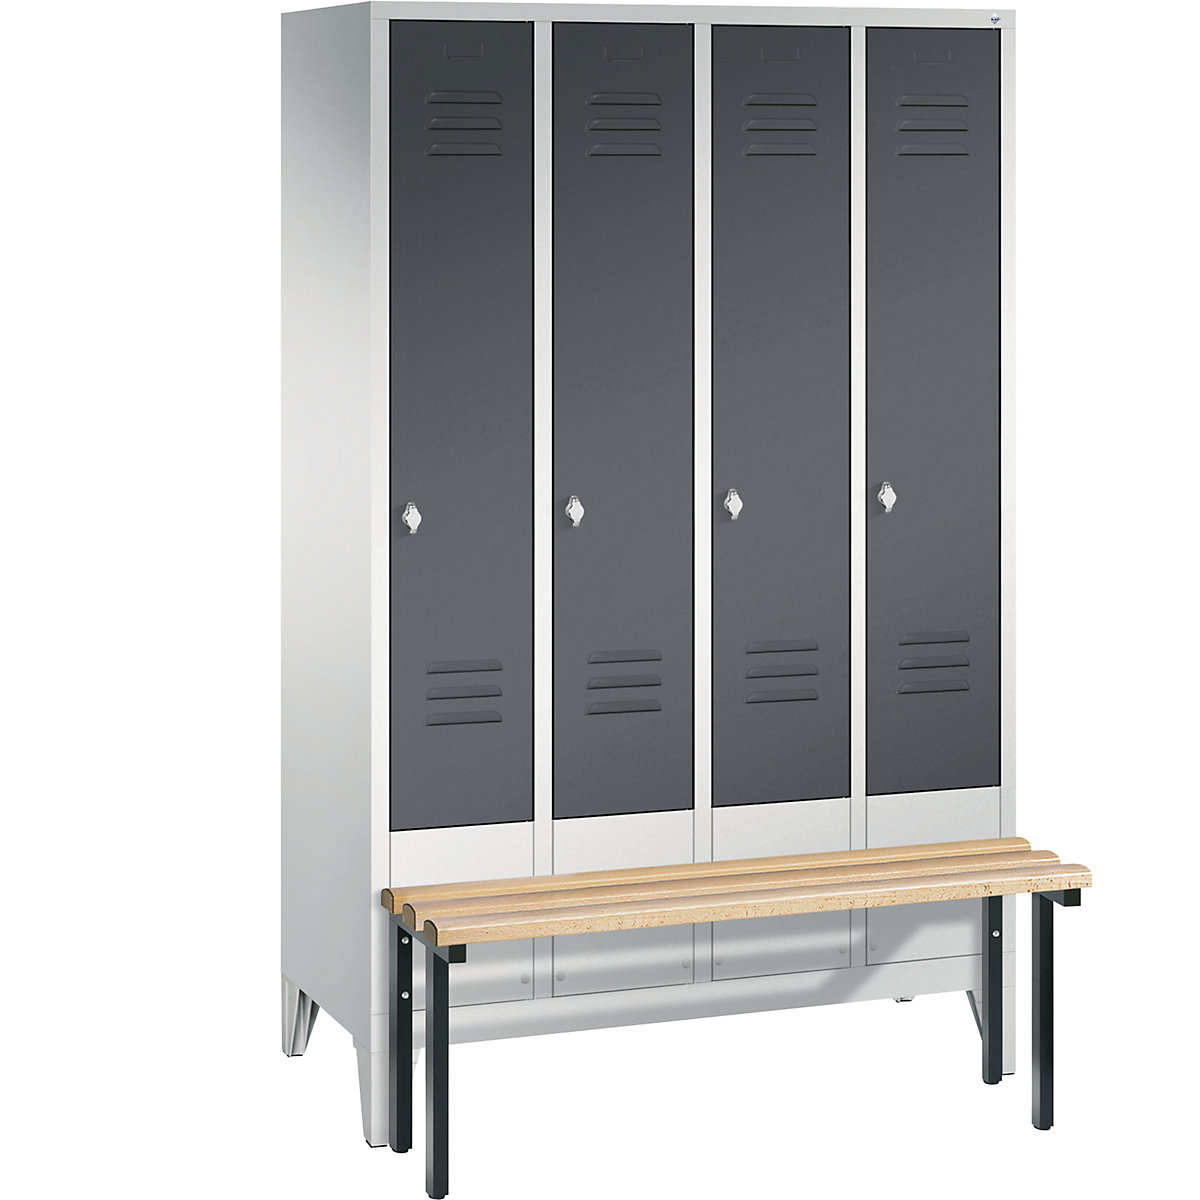 CLASSIC cloakroom locker with bench mounted in front – C+P, 4 compartments, compartment width 300 mm, light grey / black grey-10